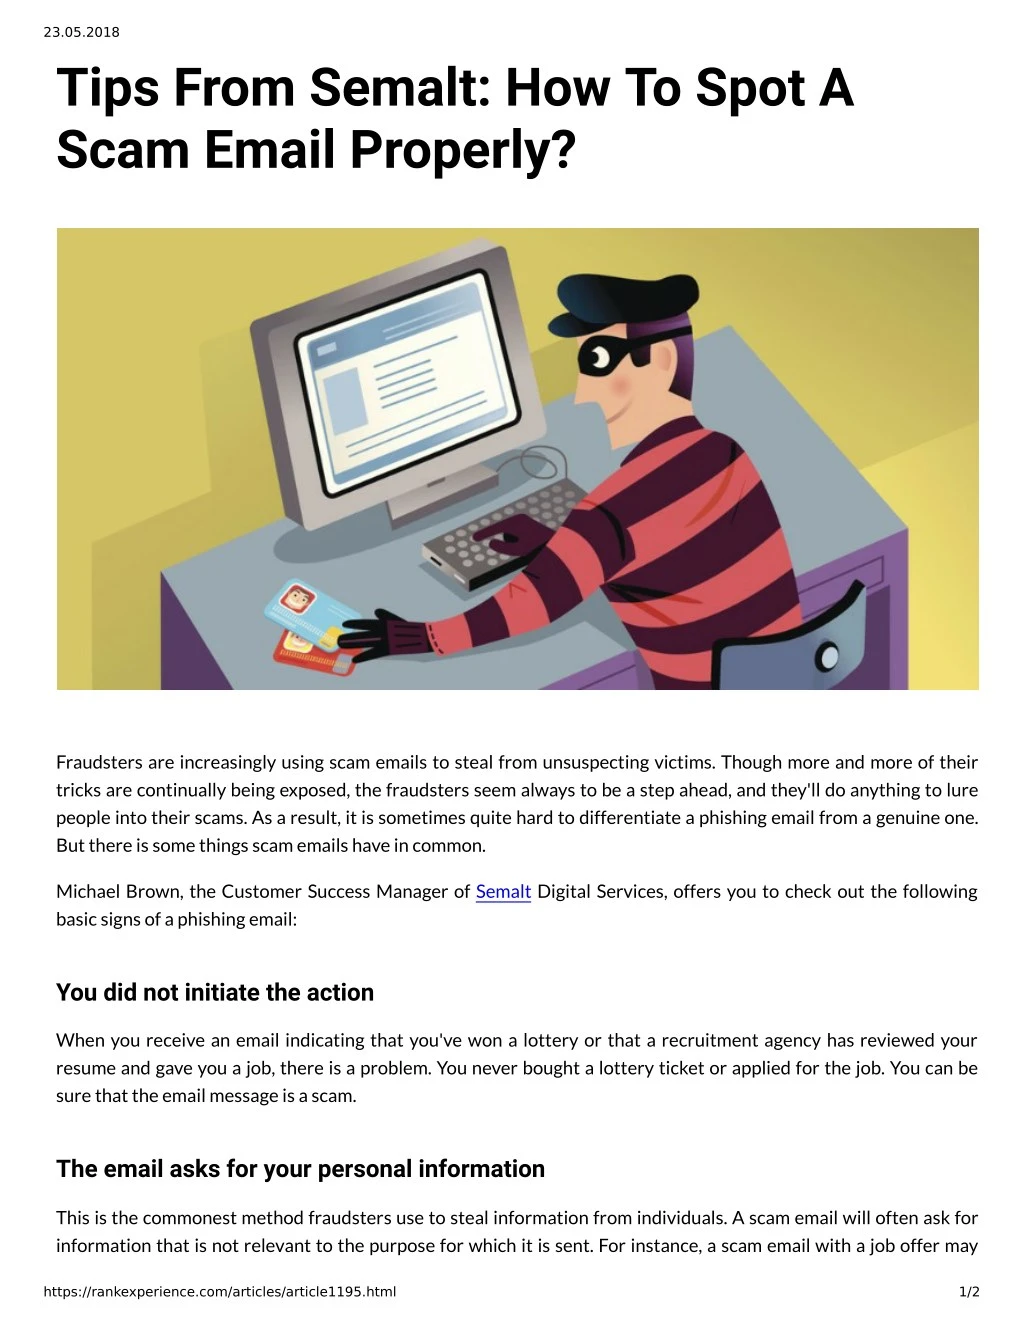 23 05 2018 tips from semalt how to spot a scam